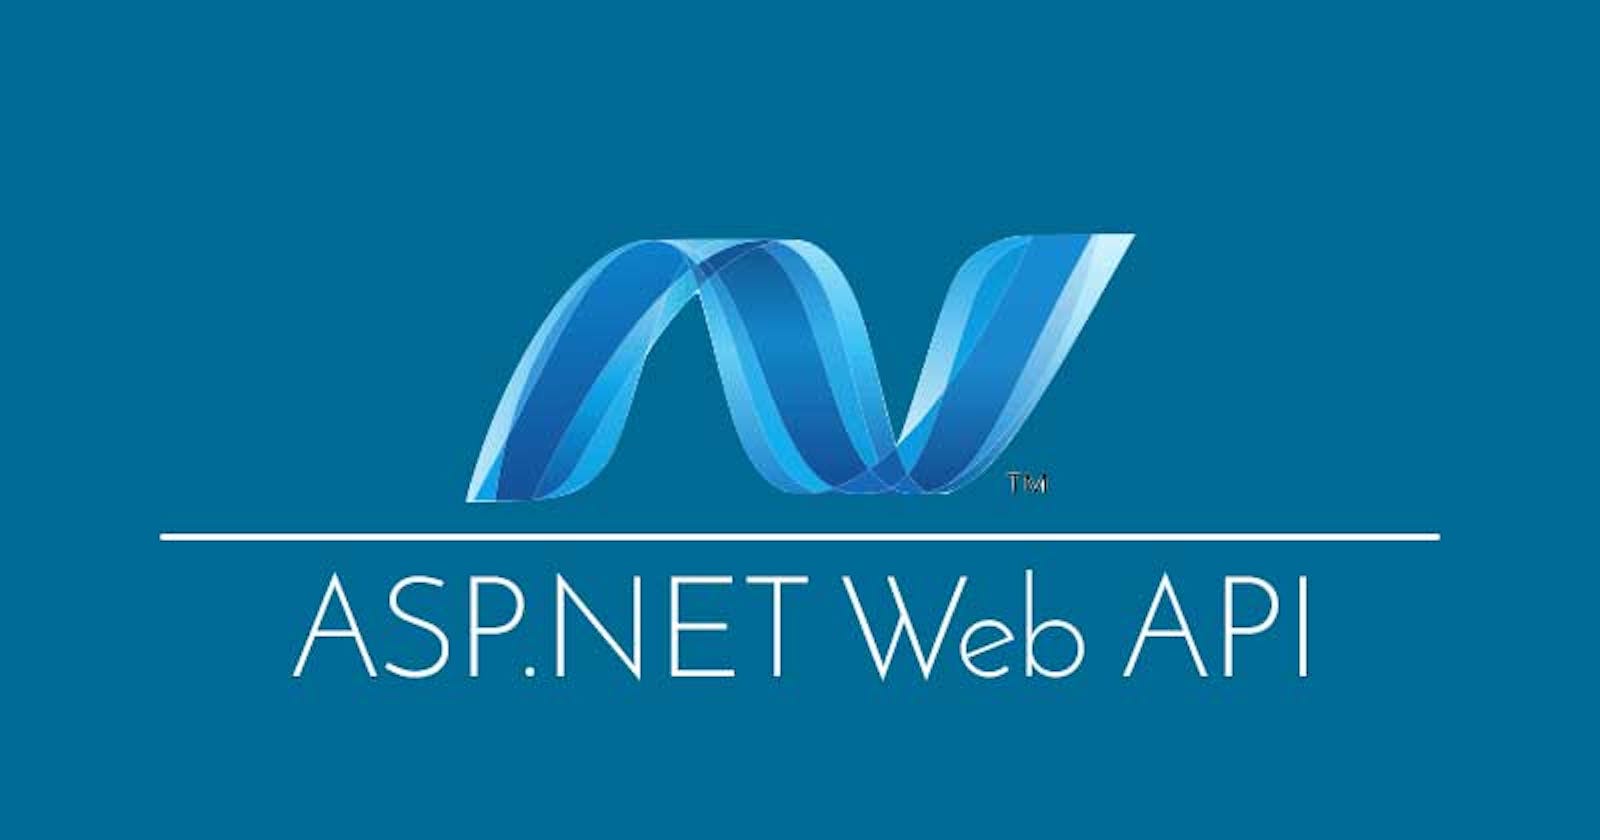 ASP.NET Web API interview questions and answers for developers